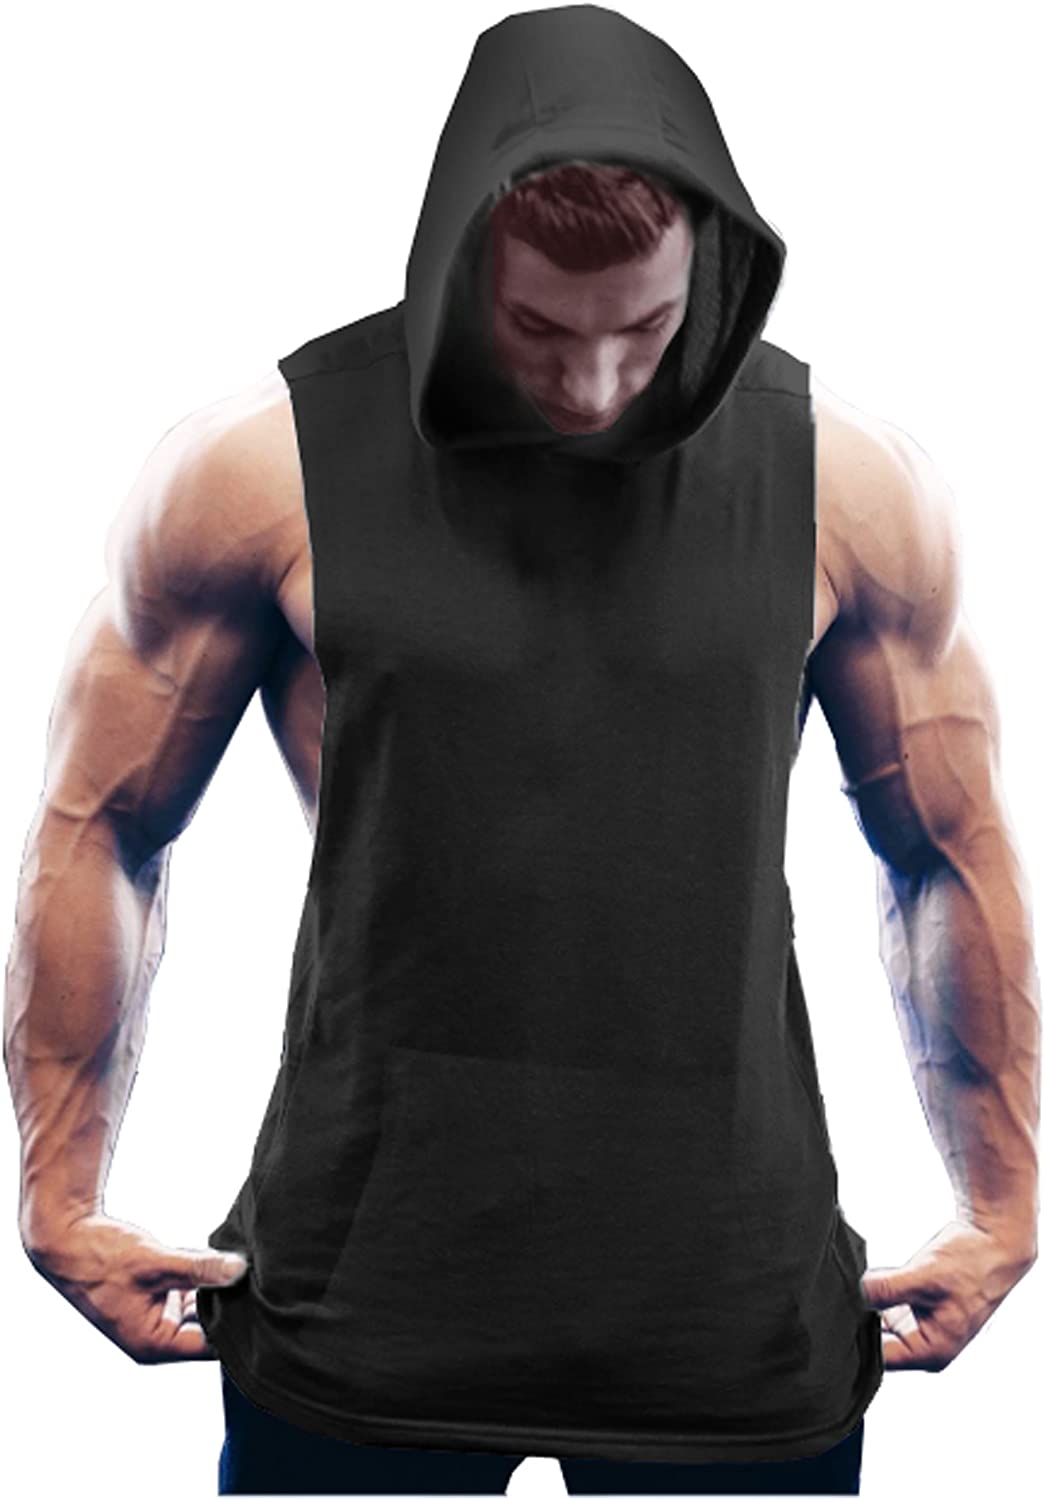 COOFANDY Mens Zip Up Workout Tank Tops Hooded Bodybuilding Fitness Muscle Cut T Shirt Sleeveless Gym Hoodies